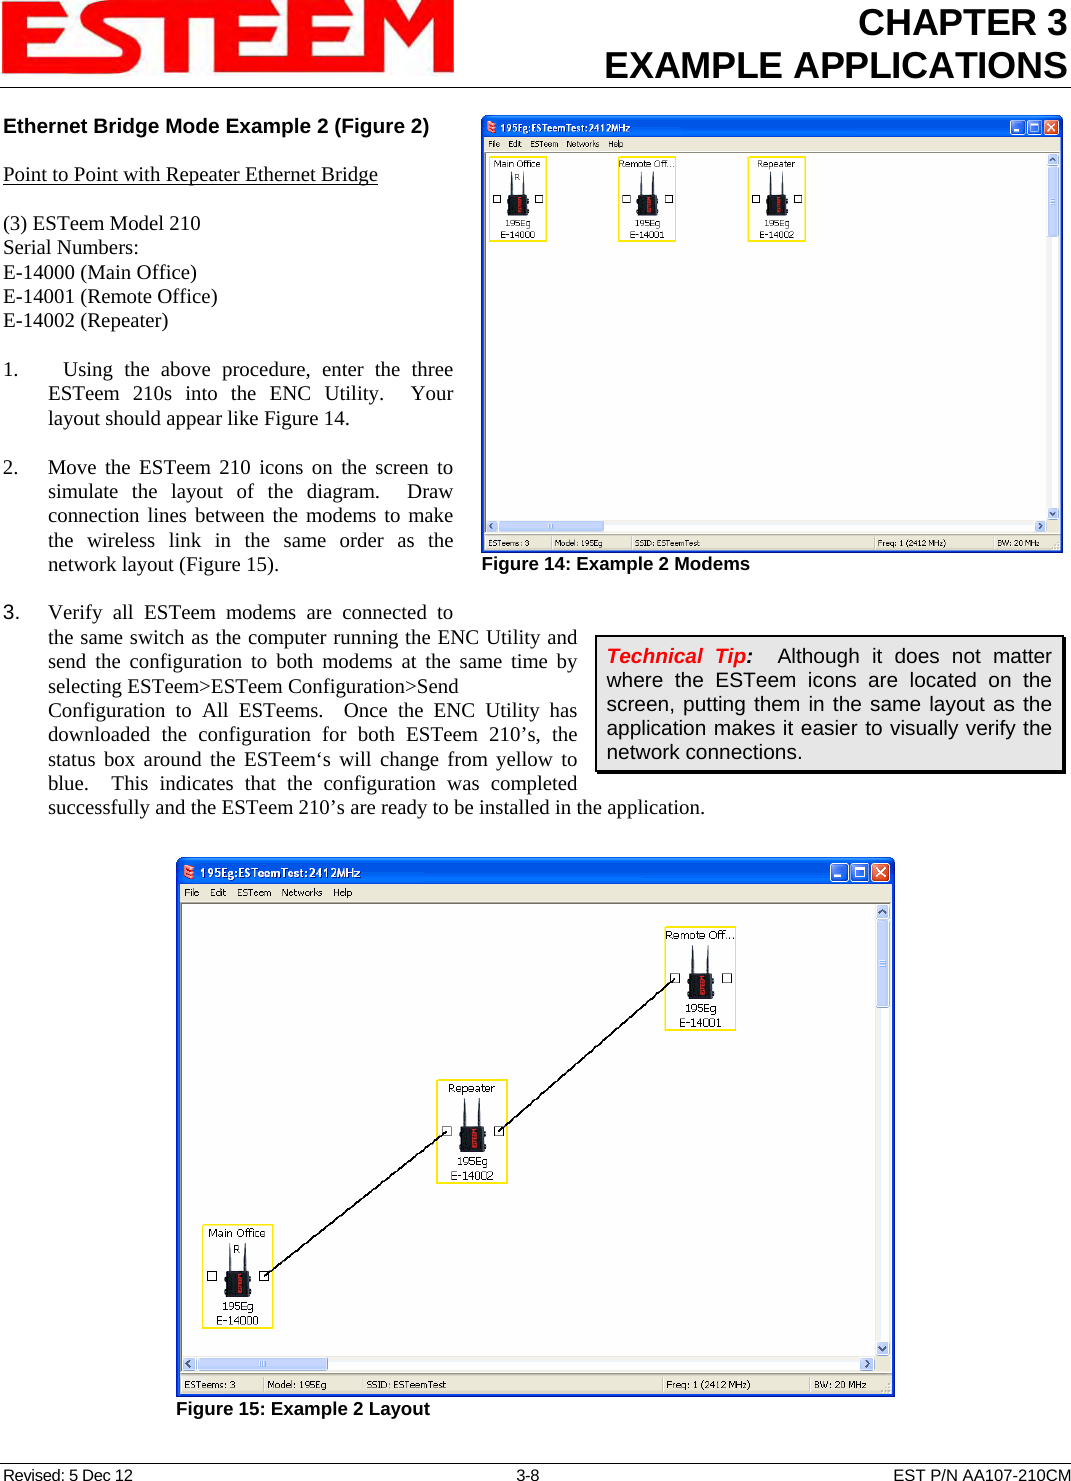 CHAPTER 3 EXAMPLE APPLICATIONS  Ethernet Bridge Mode Example 2 (Figure 2) Revised: 5 Dec 12  3-8  EST P/N AA107-210CM  Point to Point with Repeater Ethernet Bridge  (3) ESTeem Model 210 Serial Numbers: E-14000 (Main Office) E-14001 (Remote Office) E-14002 (Repeater)  1.    Using the above procedure, enter the three ESTeem 210s into the ENC Utility.  Your layout should appear like Figure 14.   2.    Move the ESTeem 210 icons on the screen to simulate the layout of the diagram.  Draw connection lines between the modems to make the wireless link in the same order as the network layout (Figure 15).  3.    Verify all ESTeem modems are connected to the same switch as the computer running the ENC Utility and send the configuration to both modems at the same time by selecting ESTeem&gt;ESTeem Configuration&gt;Send Configuration to All ESTeems.  Once the ENC Utility has downloaded the configuration for both ESTeem 210’s, the status box around the ESTeem‘s will change from yellow to blue.  This indicates that the configuration was completed successfully and the ESTeem 210’s are ready to be installed in the application.  Figure 14: Example 2 Modems  Technical Tip:  Although it does not matter where the ESTeem icons are located on the screen, putting them in the same layout as the application makes it easier to visually verify the network connections.  Figure 15: Example 2 Layout  